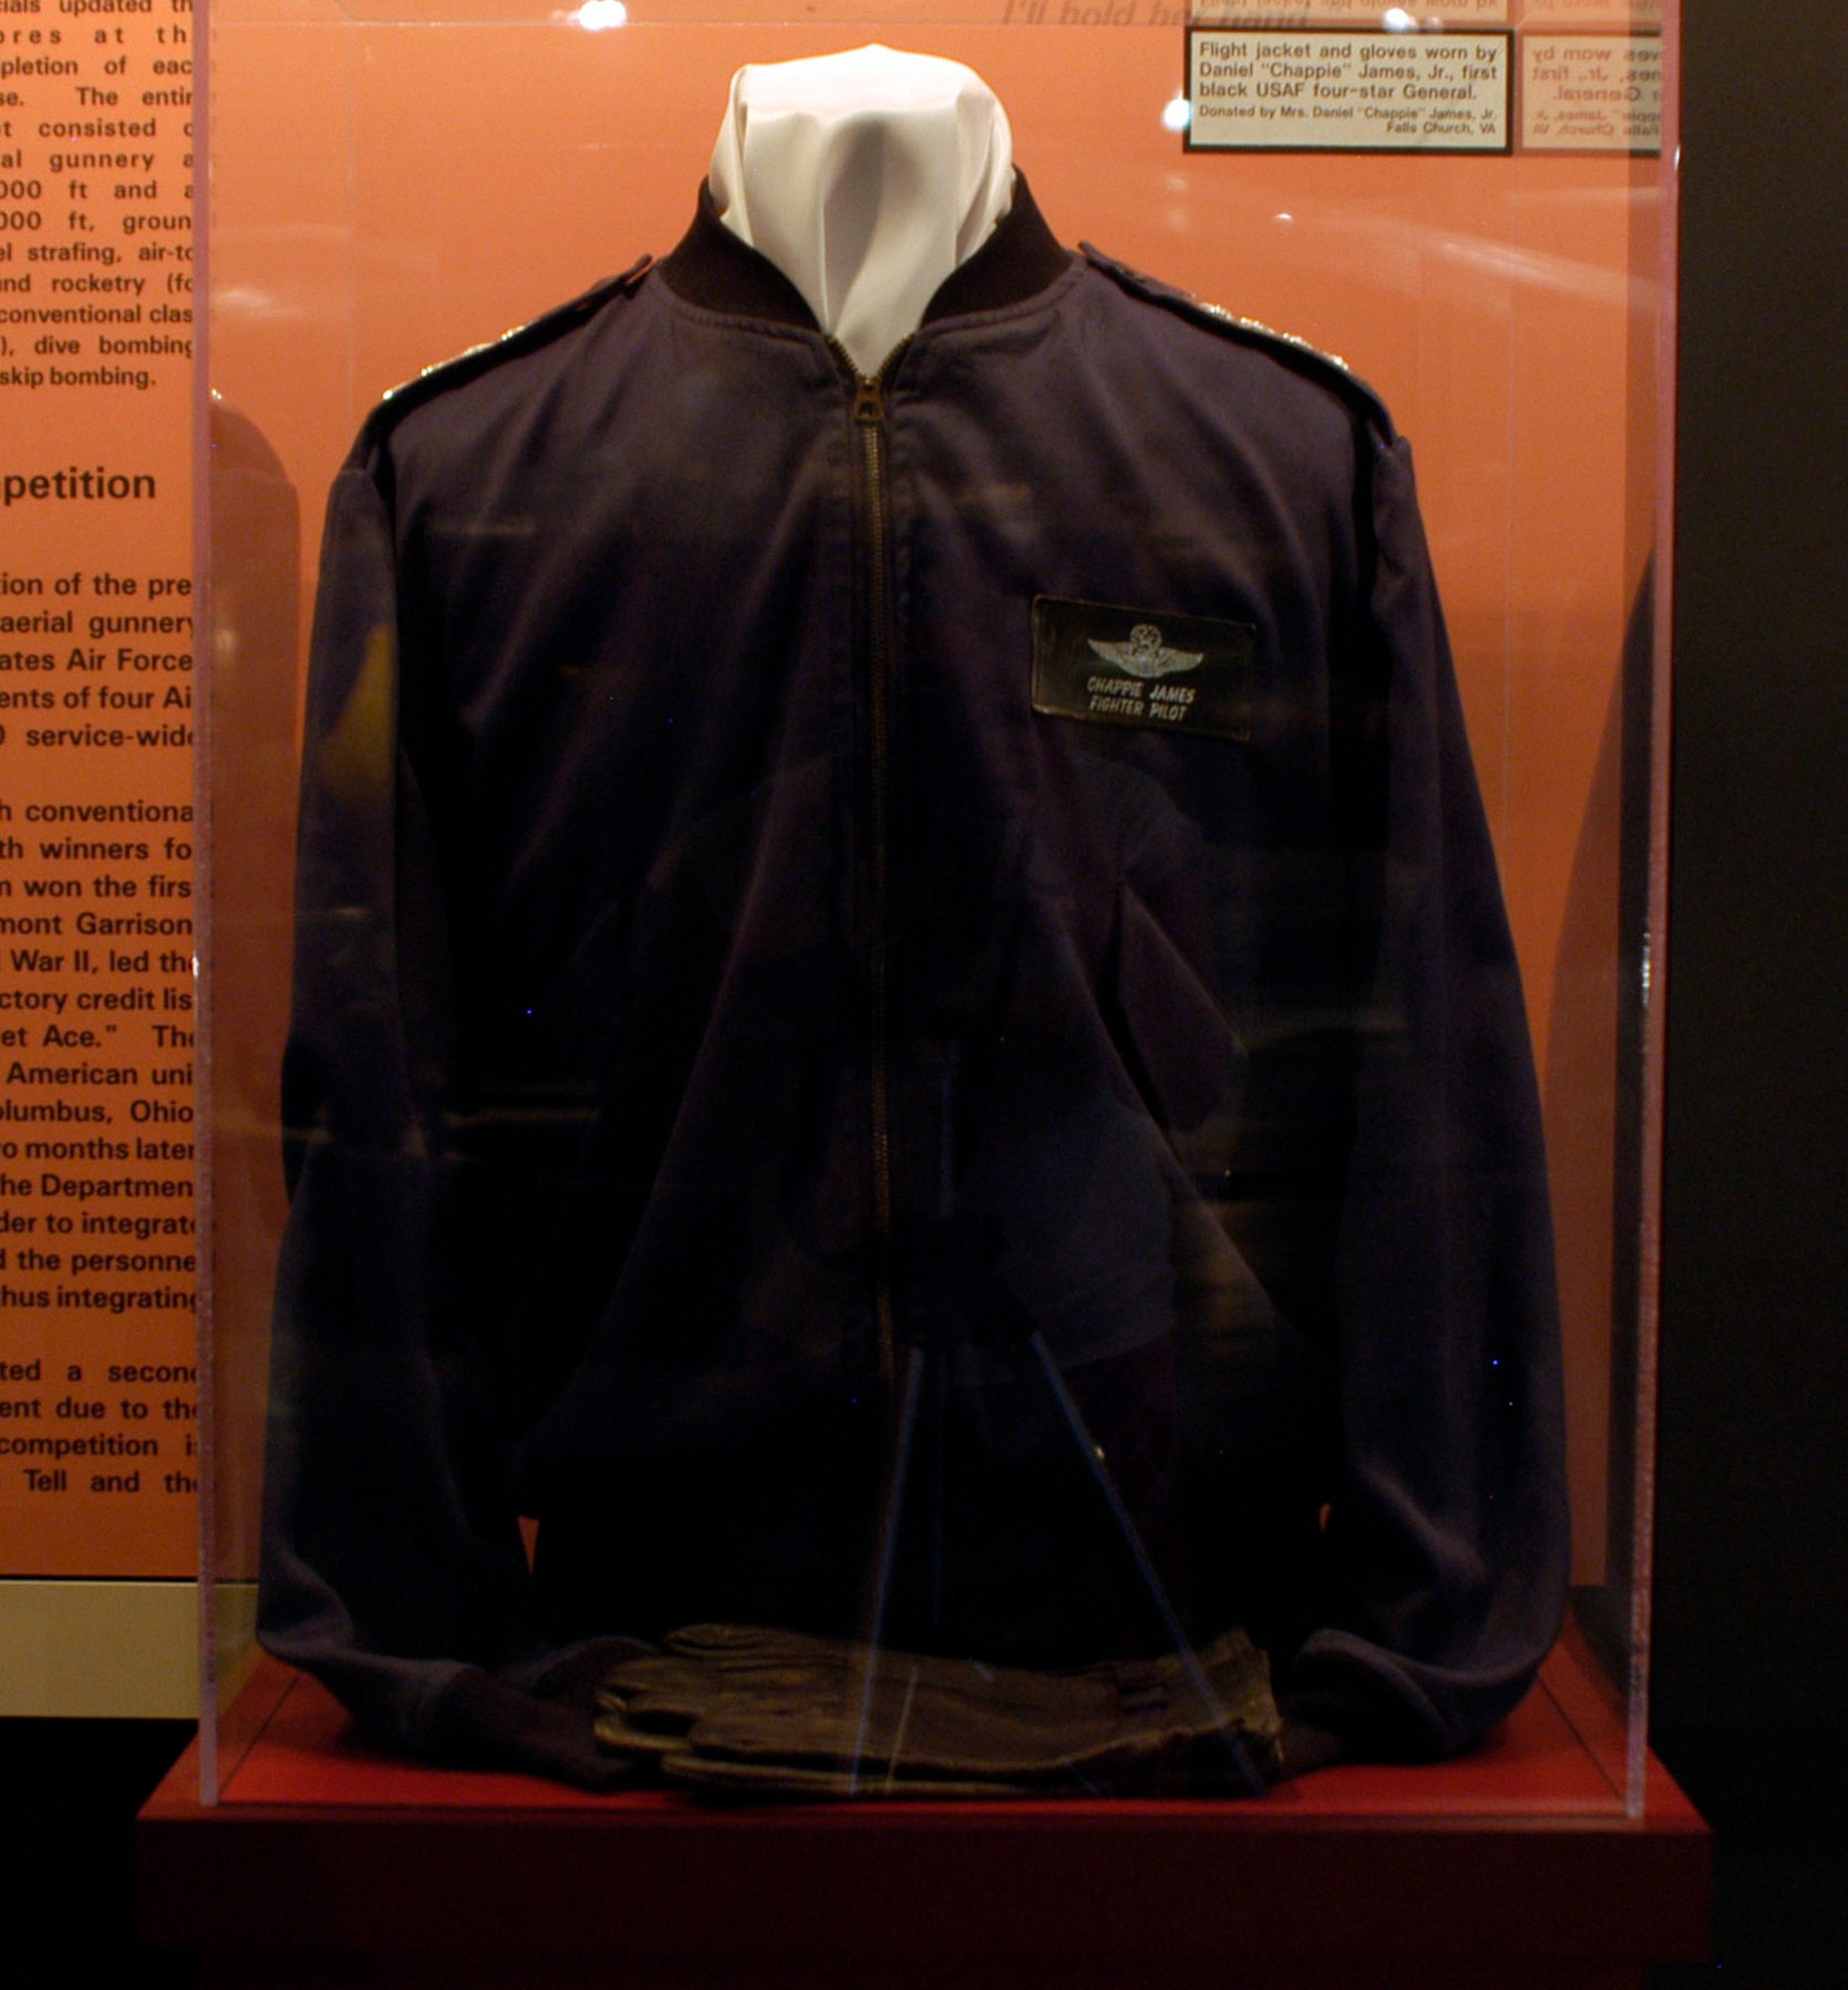 DAYTON, Ohio - Flight jacket and gloves worn by Daniel "Chappie" James, Jr. on display in the World War II Gallery at the National Museum of the U.S. Air Force. (U.S. Air Force photo)